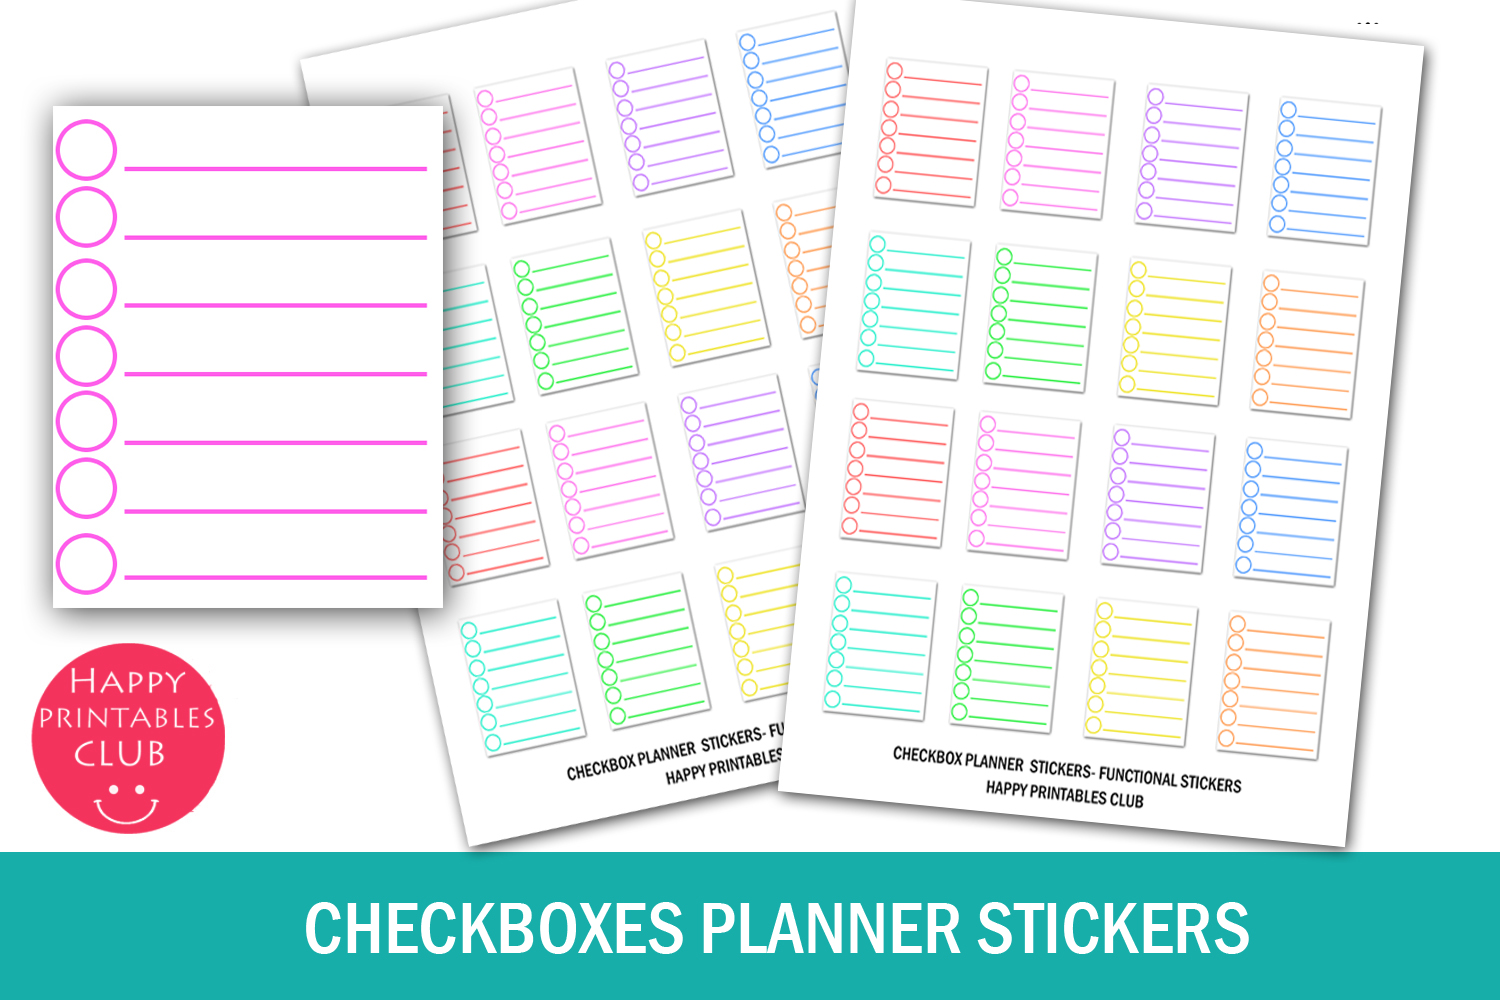 checkbox planner stickers functional stickers to dos chores 429168